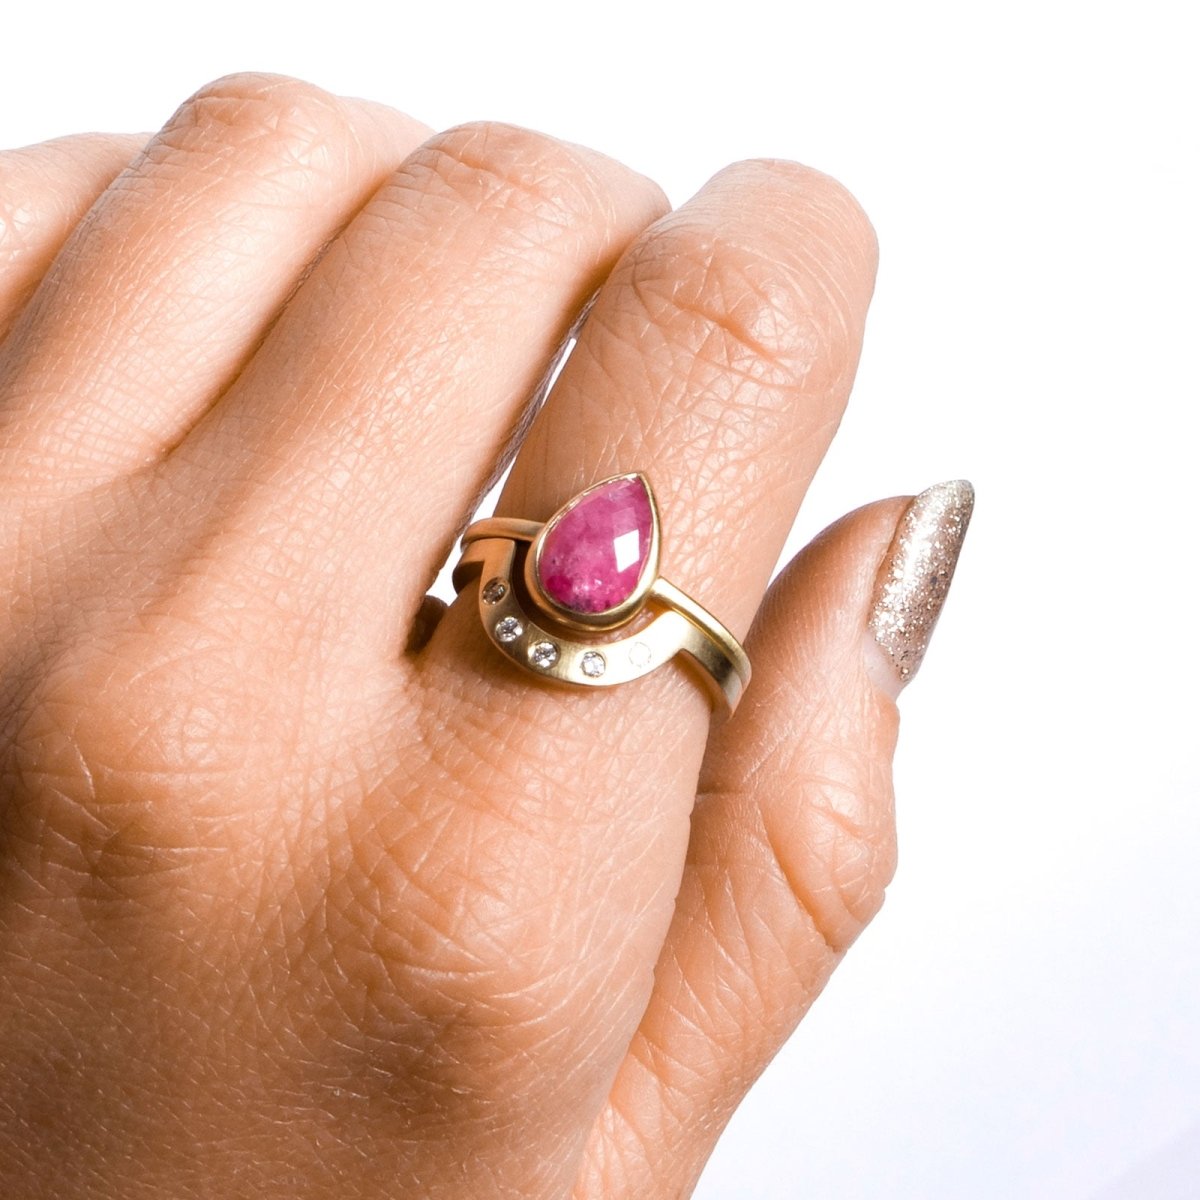 A model wears a conflict-free pear-shaped rose cut ruby set in a narrow 14k yellow gold band with a matte finish. Surrounding the ruby ring is an arch shaped yellow gold band with five lab grown white diamonds and a matte finish. The Pirum Ring and the White Diamond Cor Ring are designed by Betsy & Iya and handcrafted in Portland, Oregon.